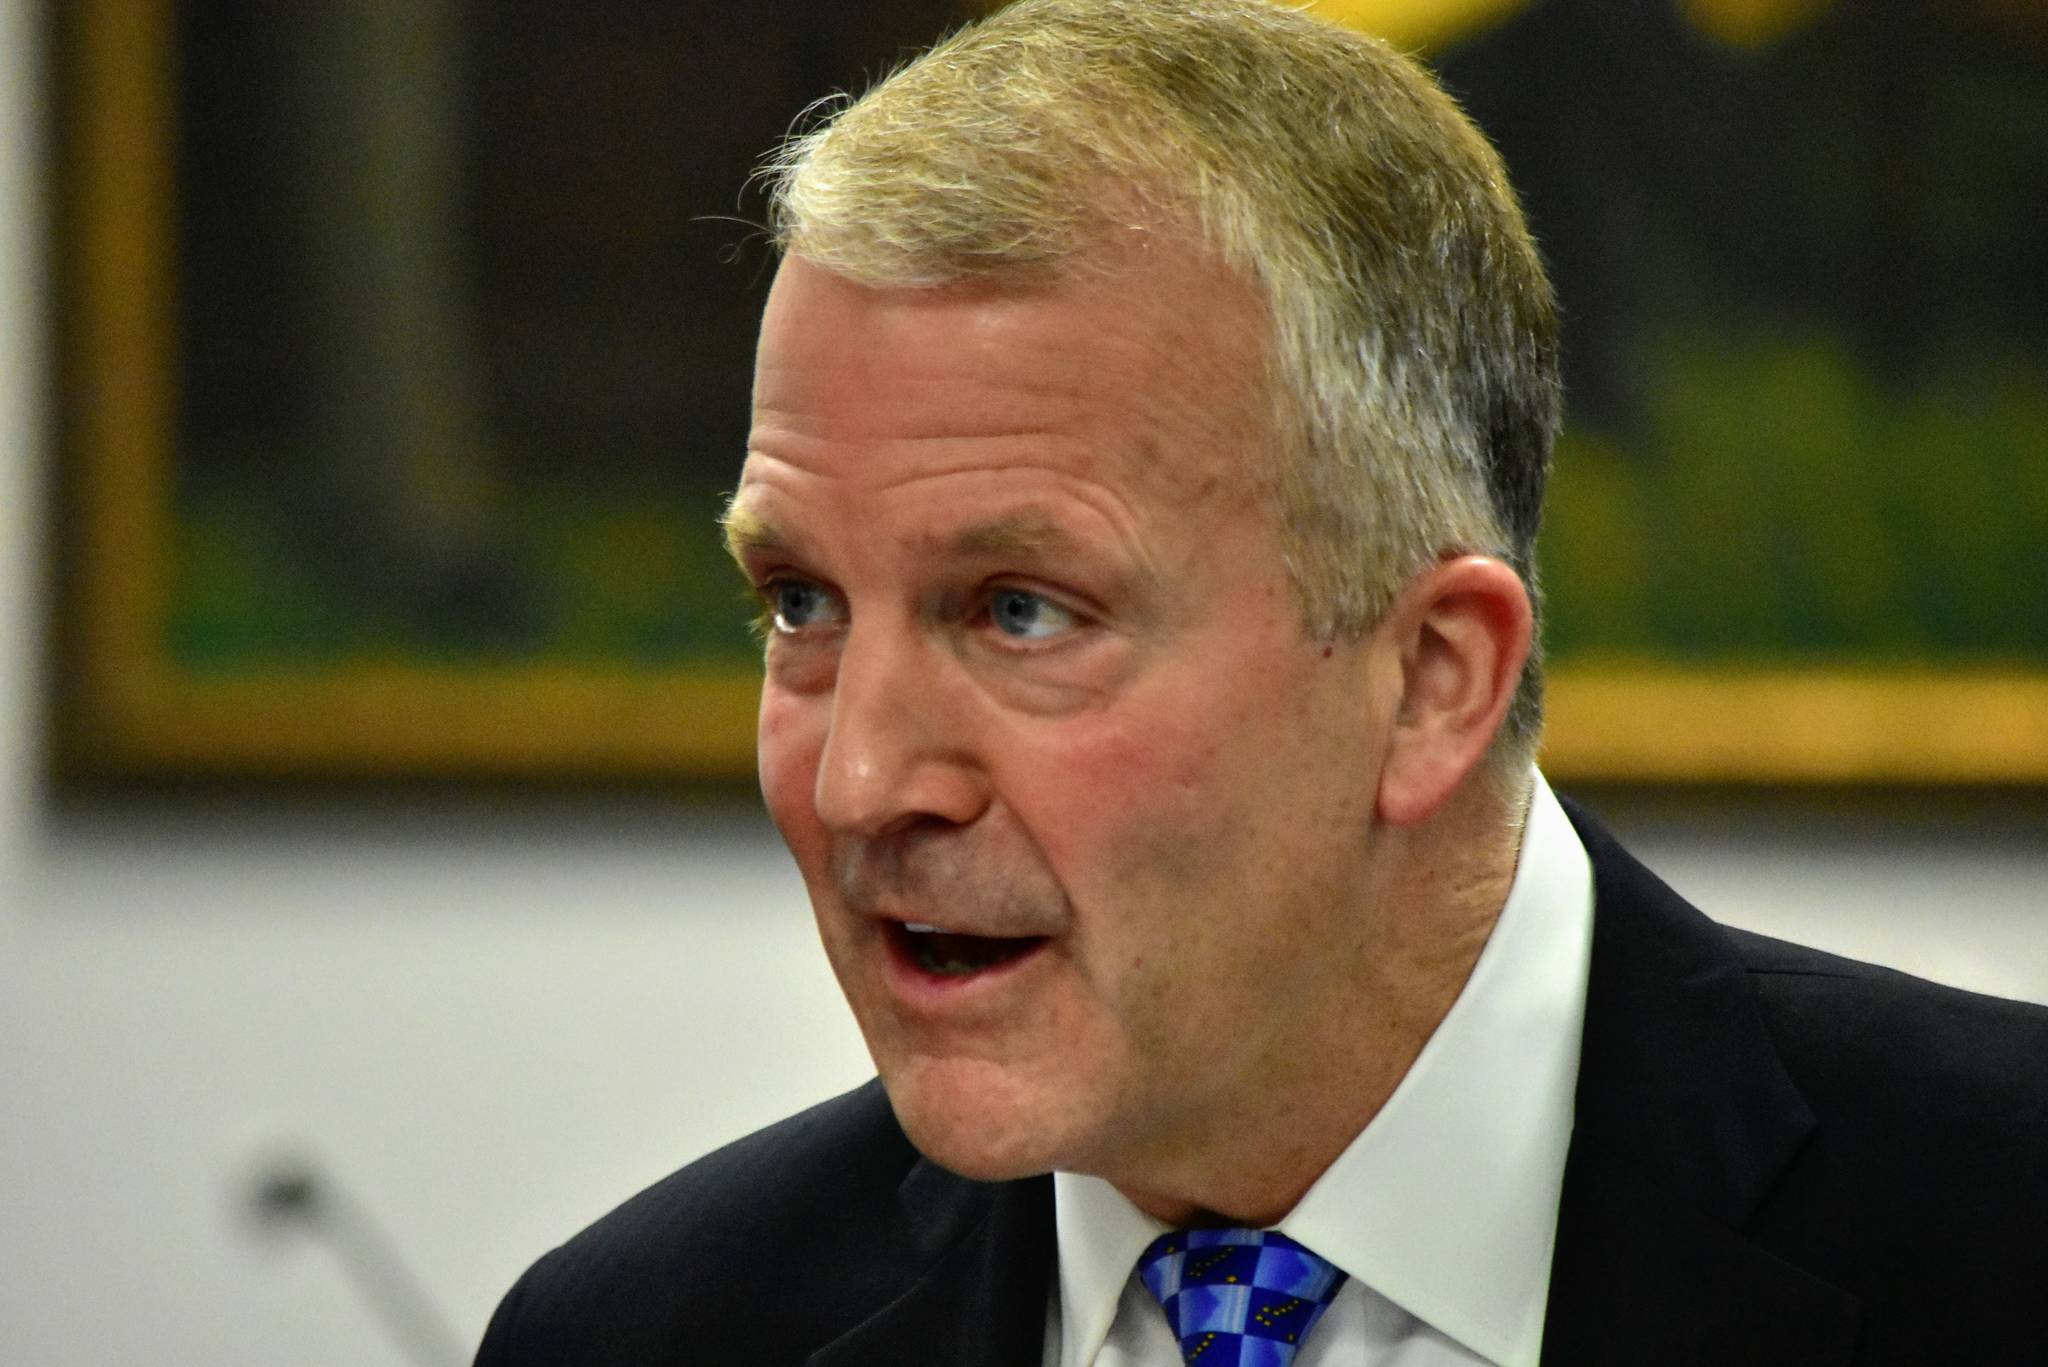 Sen. Dan Sullivan, R-Alaska, met with reporters after delivering an address to the first joint session of 2021 for the Alaska State Legislature on Monday, May 3, 2021. Sullivan was critical of the Biden administration in his remarks to lawmakers, saying his environmental policies were punative to Alaska. (Peter Segall / Juneau Empire)